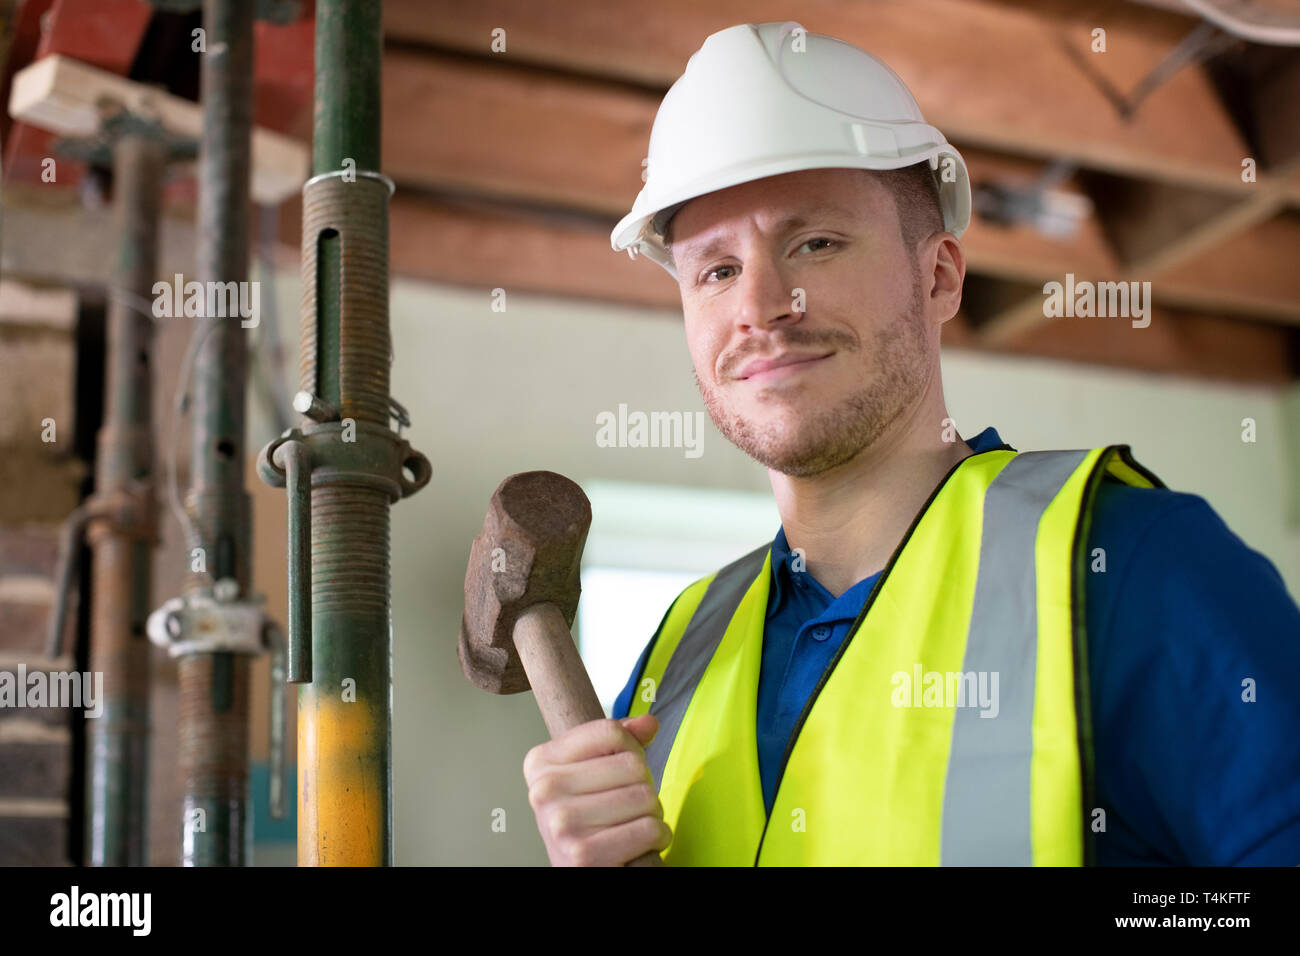 Portrait Of Construction Worker With Sledgehammer Demolishing Wall In Renovated House Stock Photo